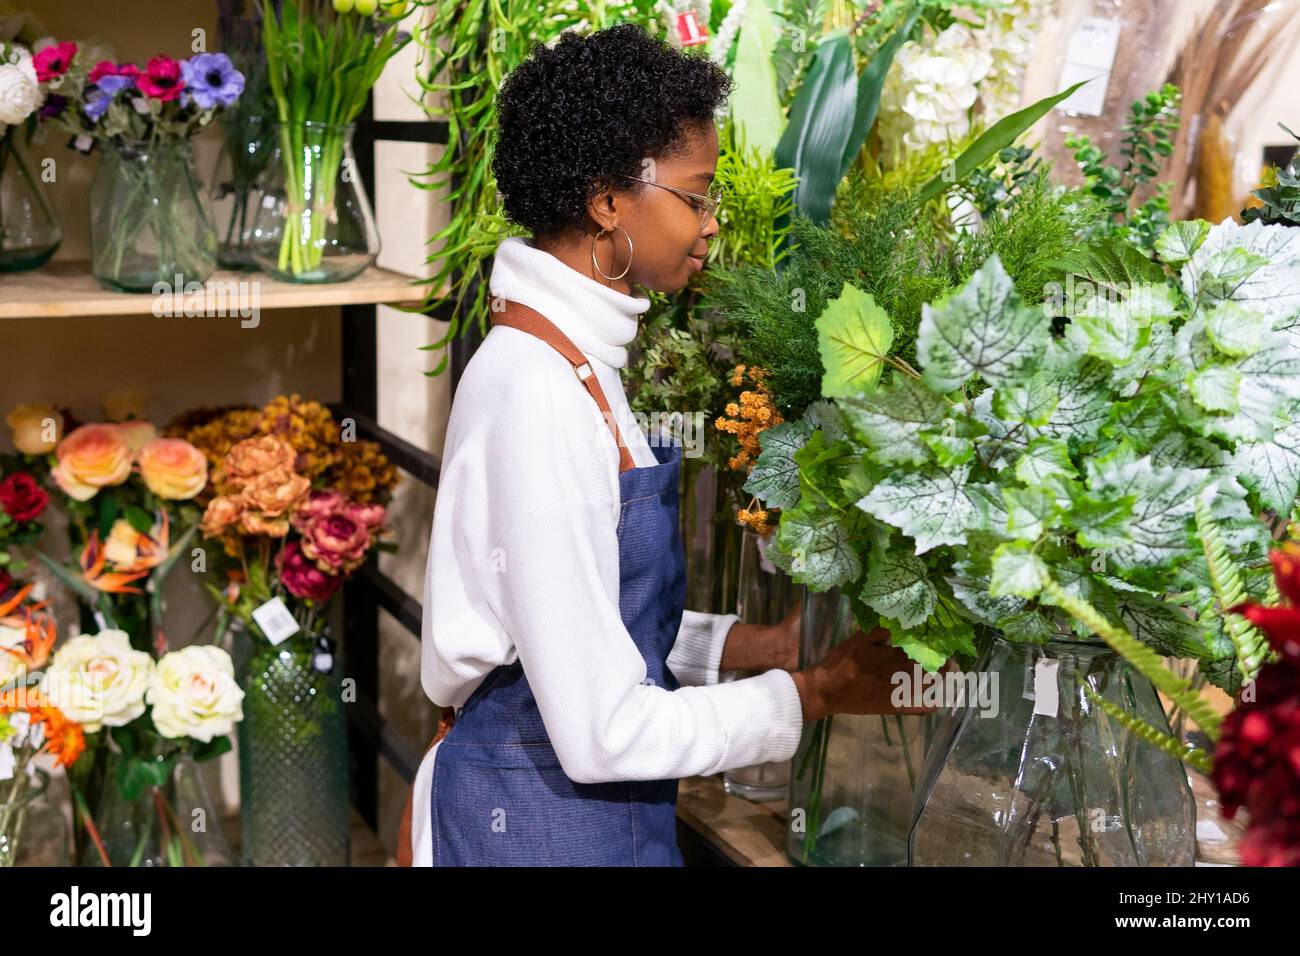 Positive African American female florist with eyes closed standing near green Tolmiea plants during work in modern floristry shop Stock Photo